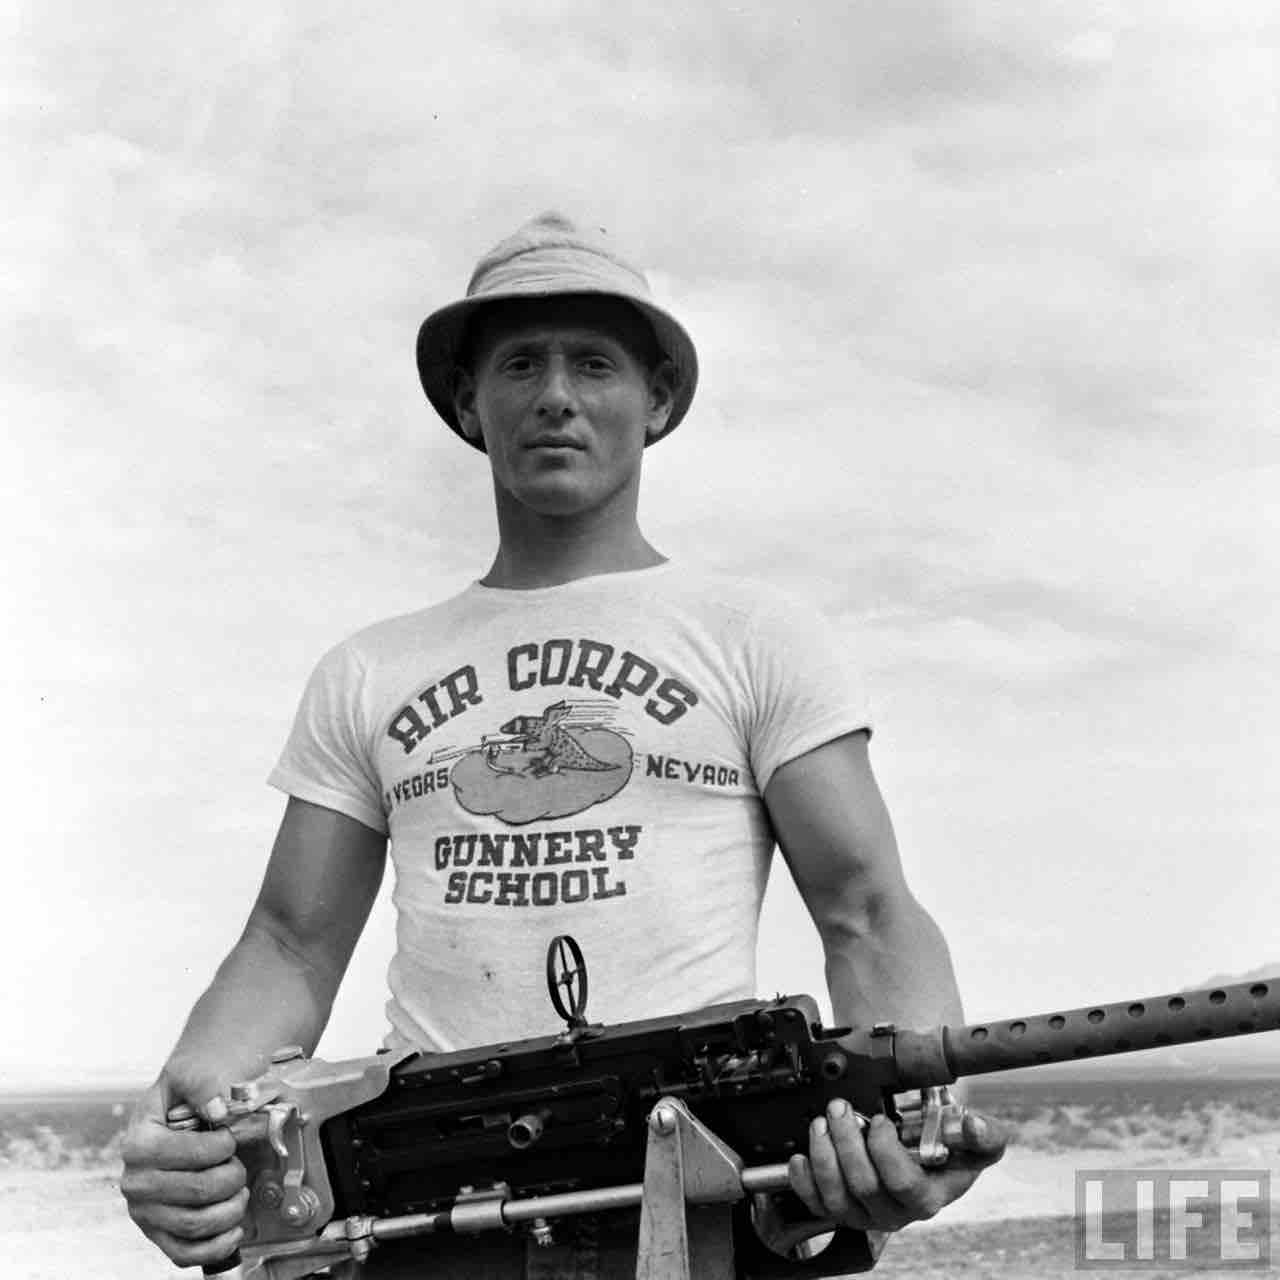 Photo from Life Magazine from 1942 of a A student with a T-shirt that says the Gunnery School holding a firearm. 